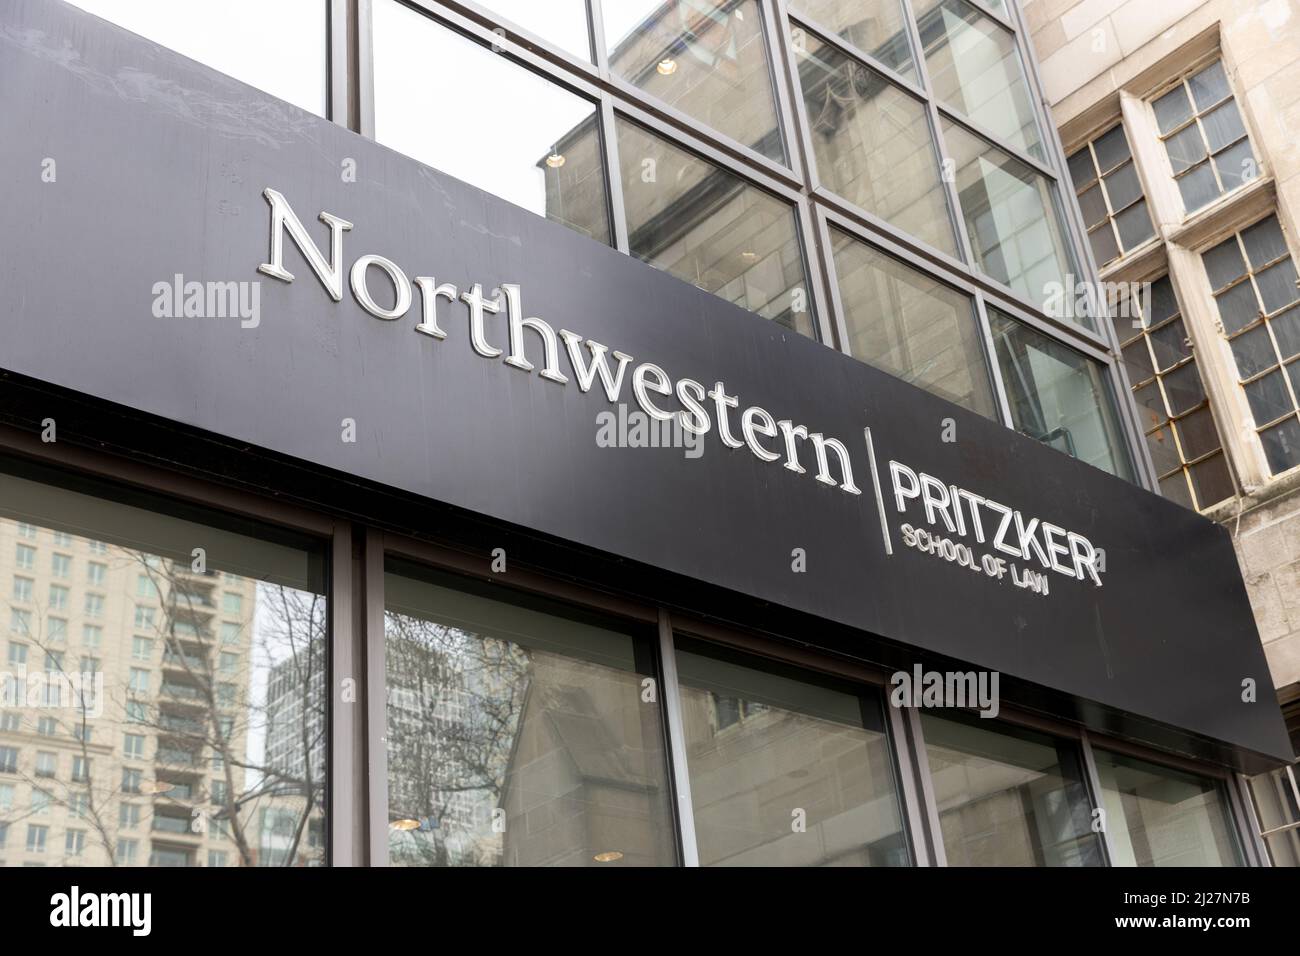 The Pritzker School of Law at Northwestern University in downtown Chicago. Stock Photo